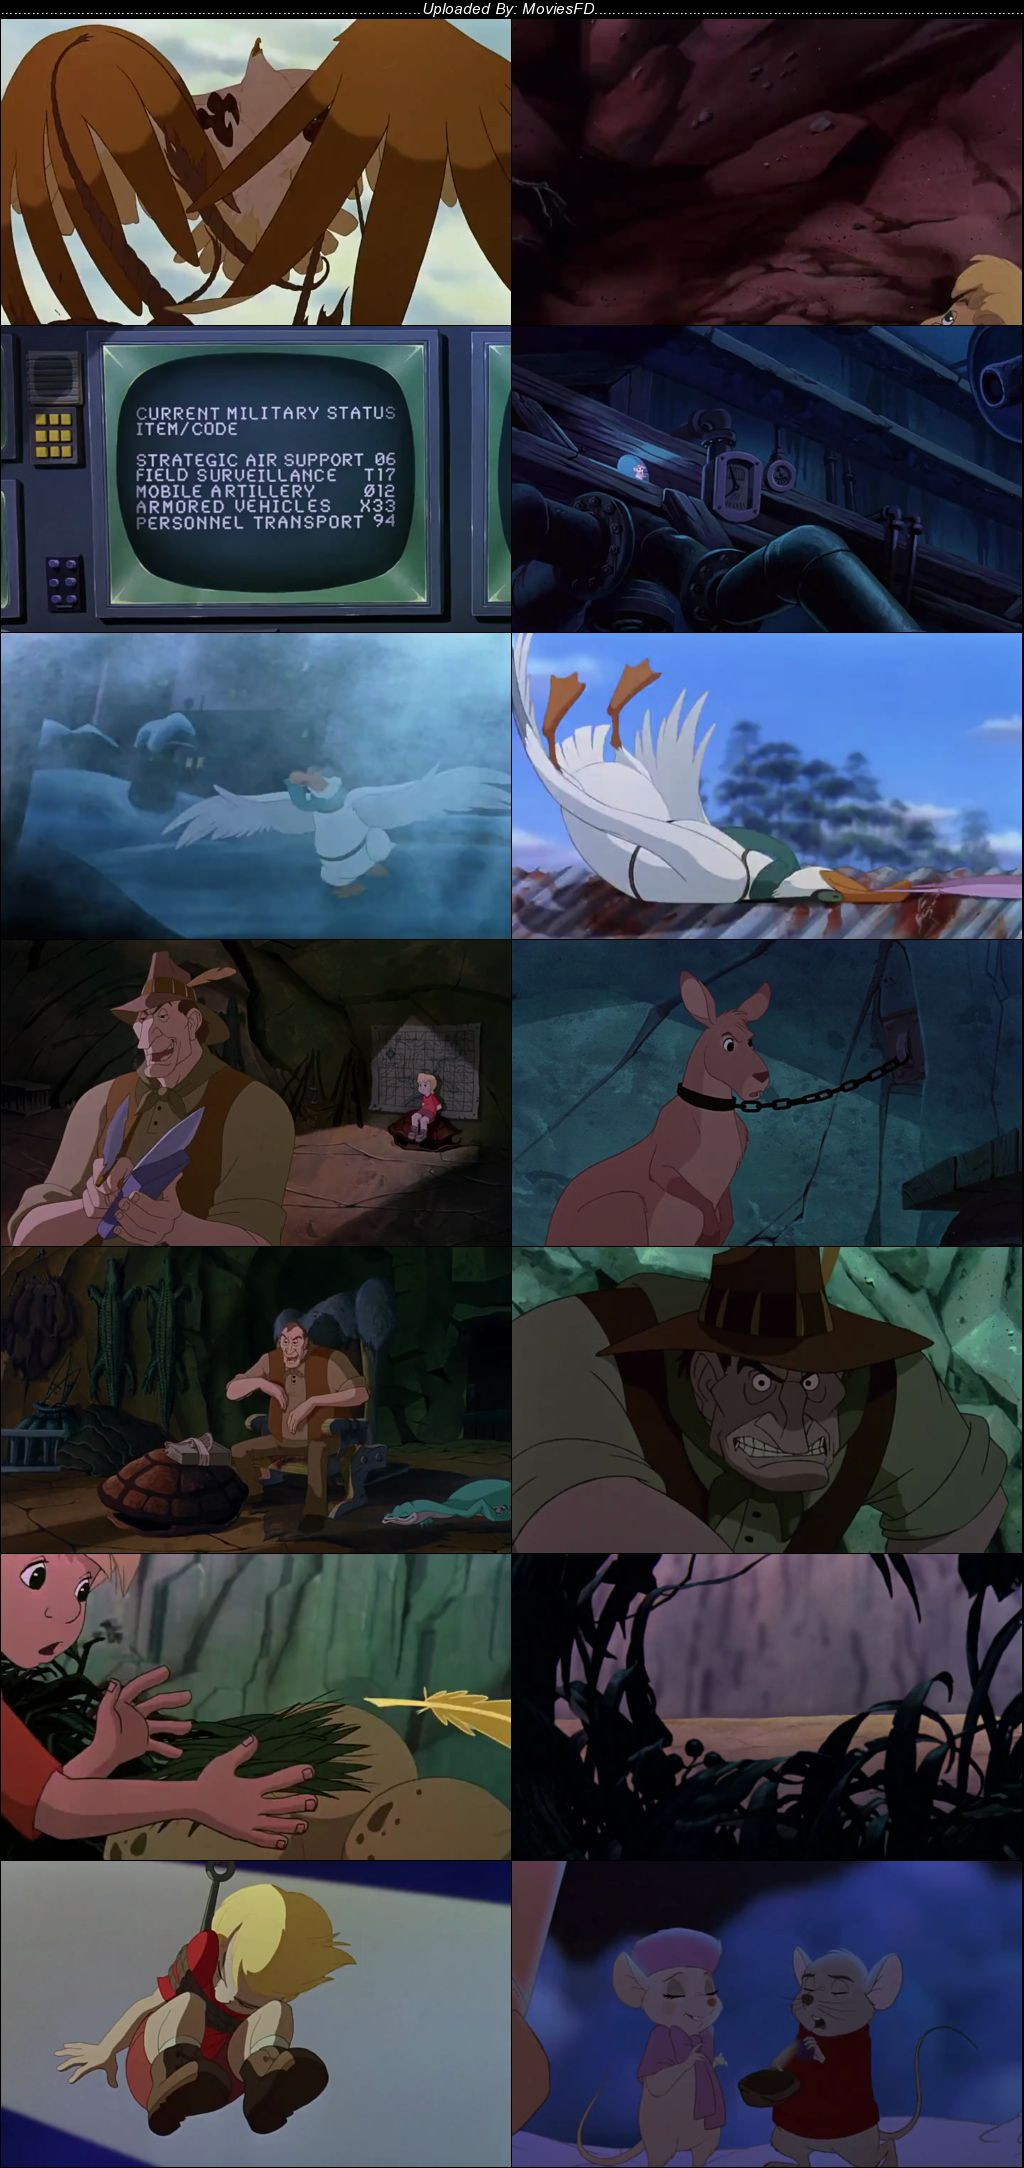 Download The Rescuers Down Under (1990) BluRay [Hindi + English] ESub 480p 720p